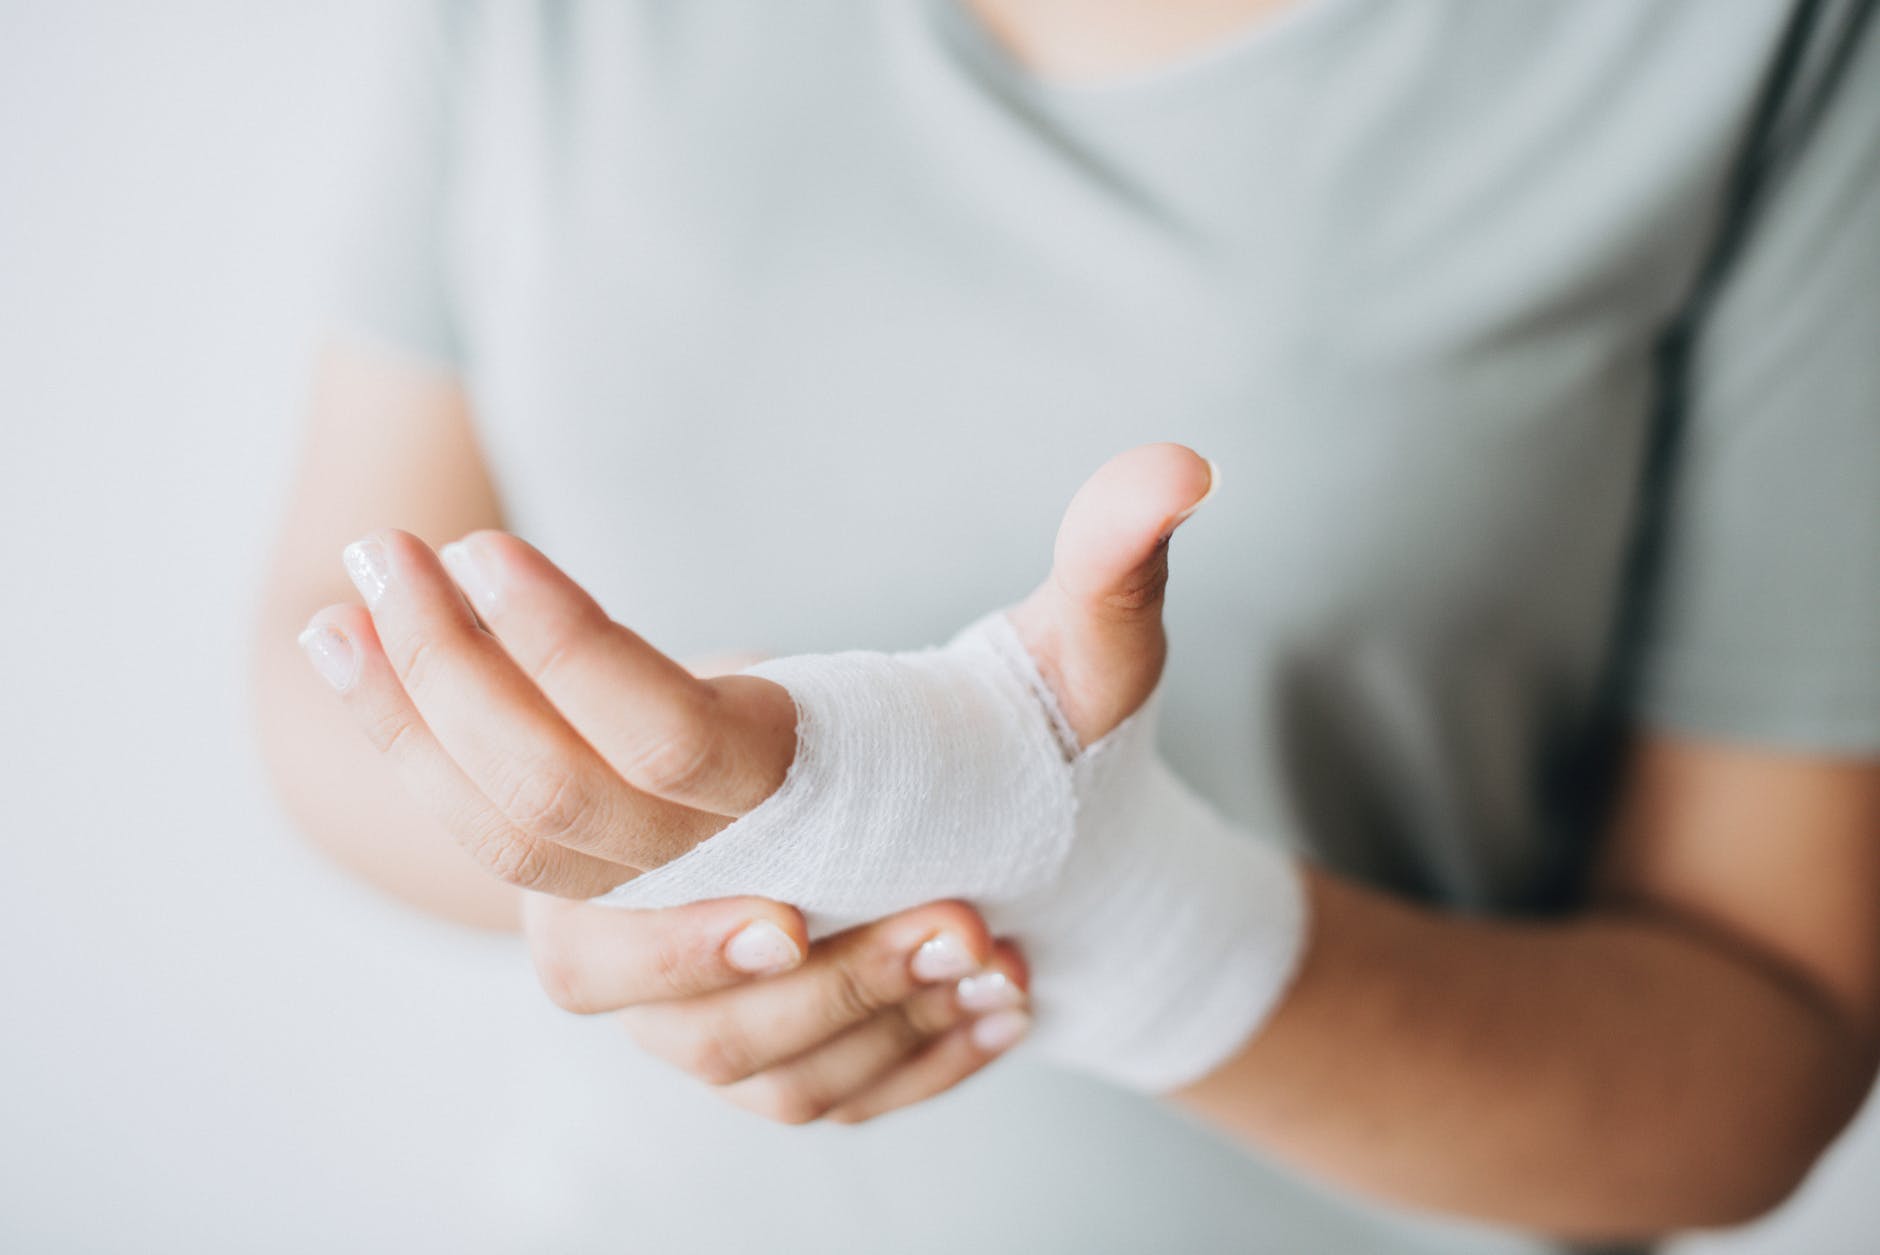 Tips for Recovering from an Injury